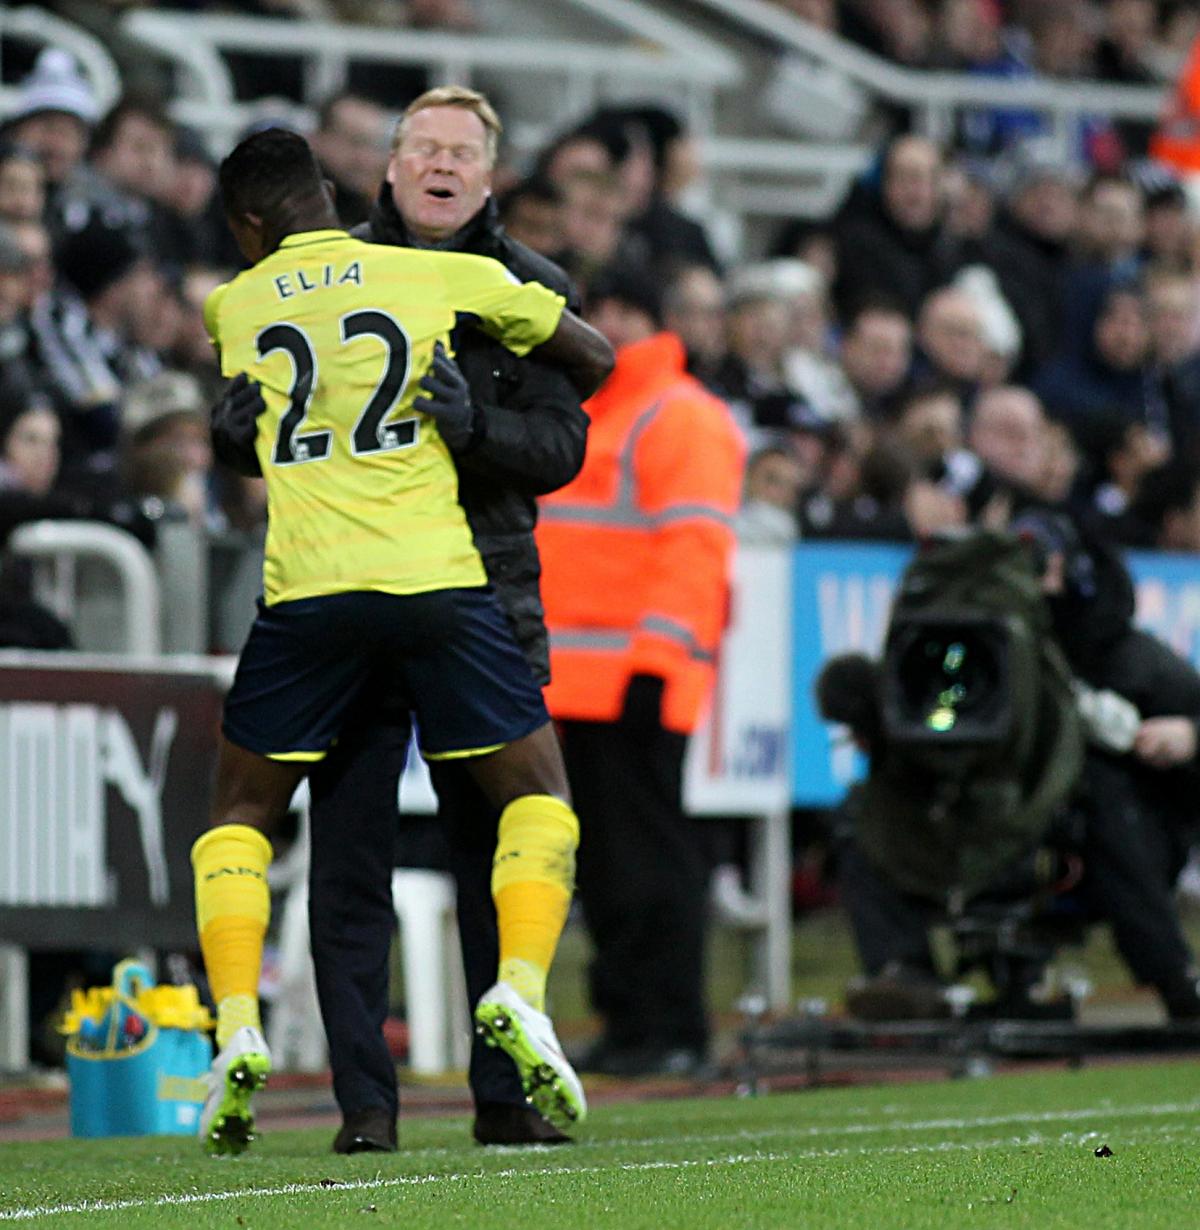 The wins keep coming, as Eljero Elia embraces Koeman after scoring in the 2-1 win at Newcastle.